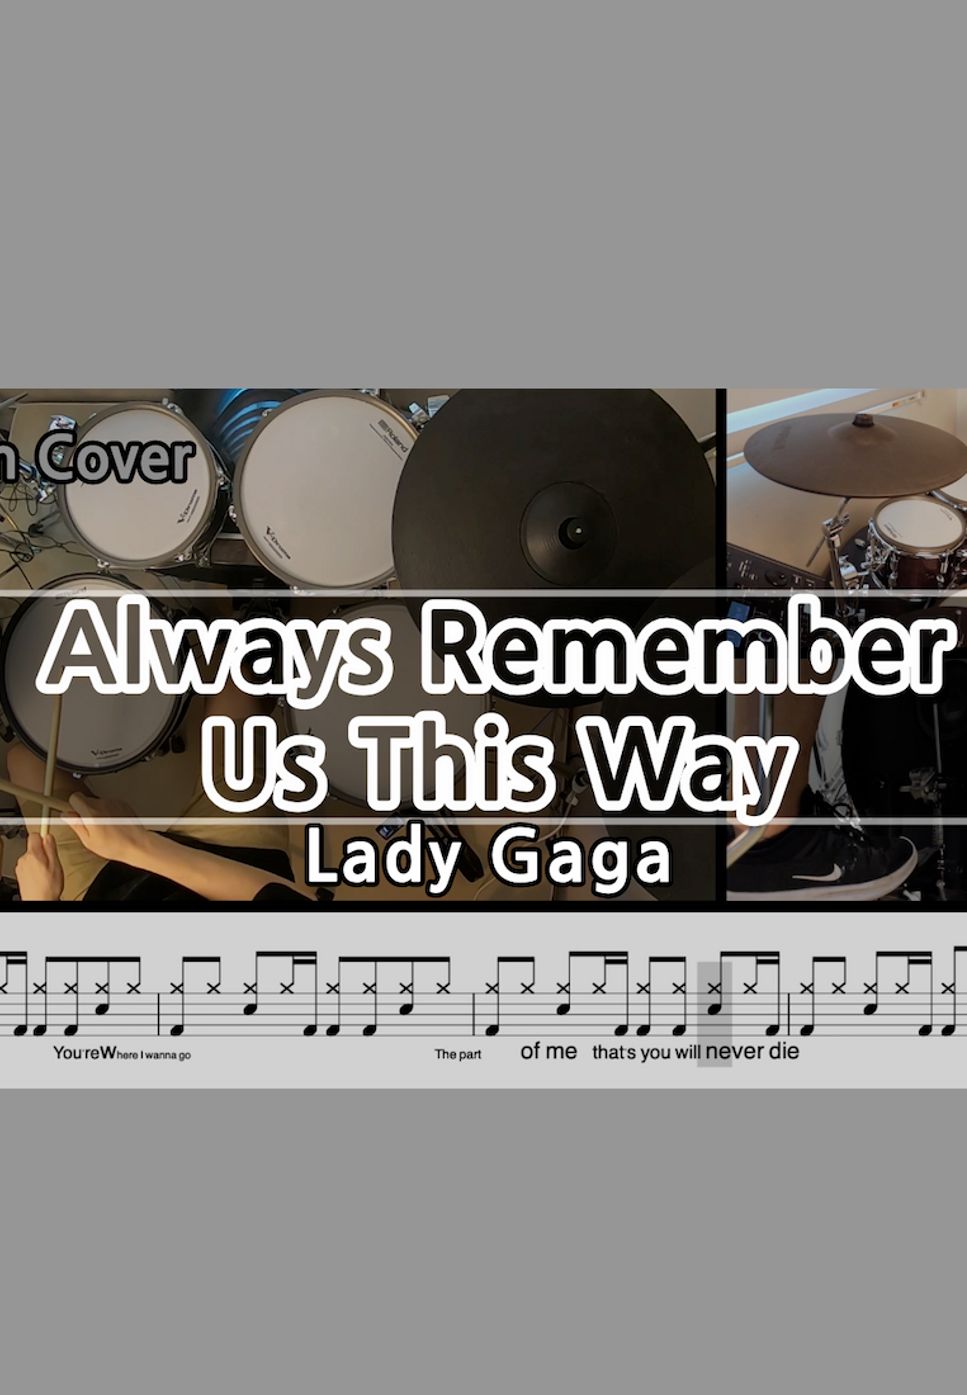 Lady Gaga - Always Remember Us This Way by Gwon's DrumLesson